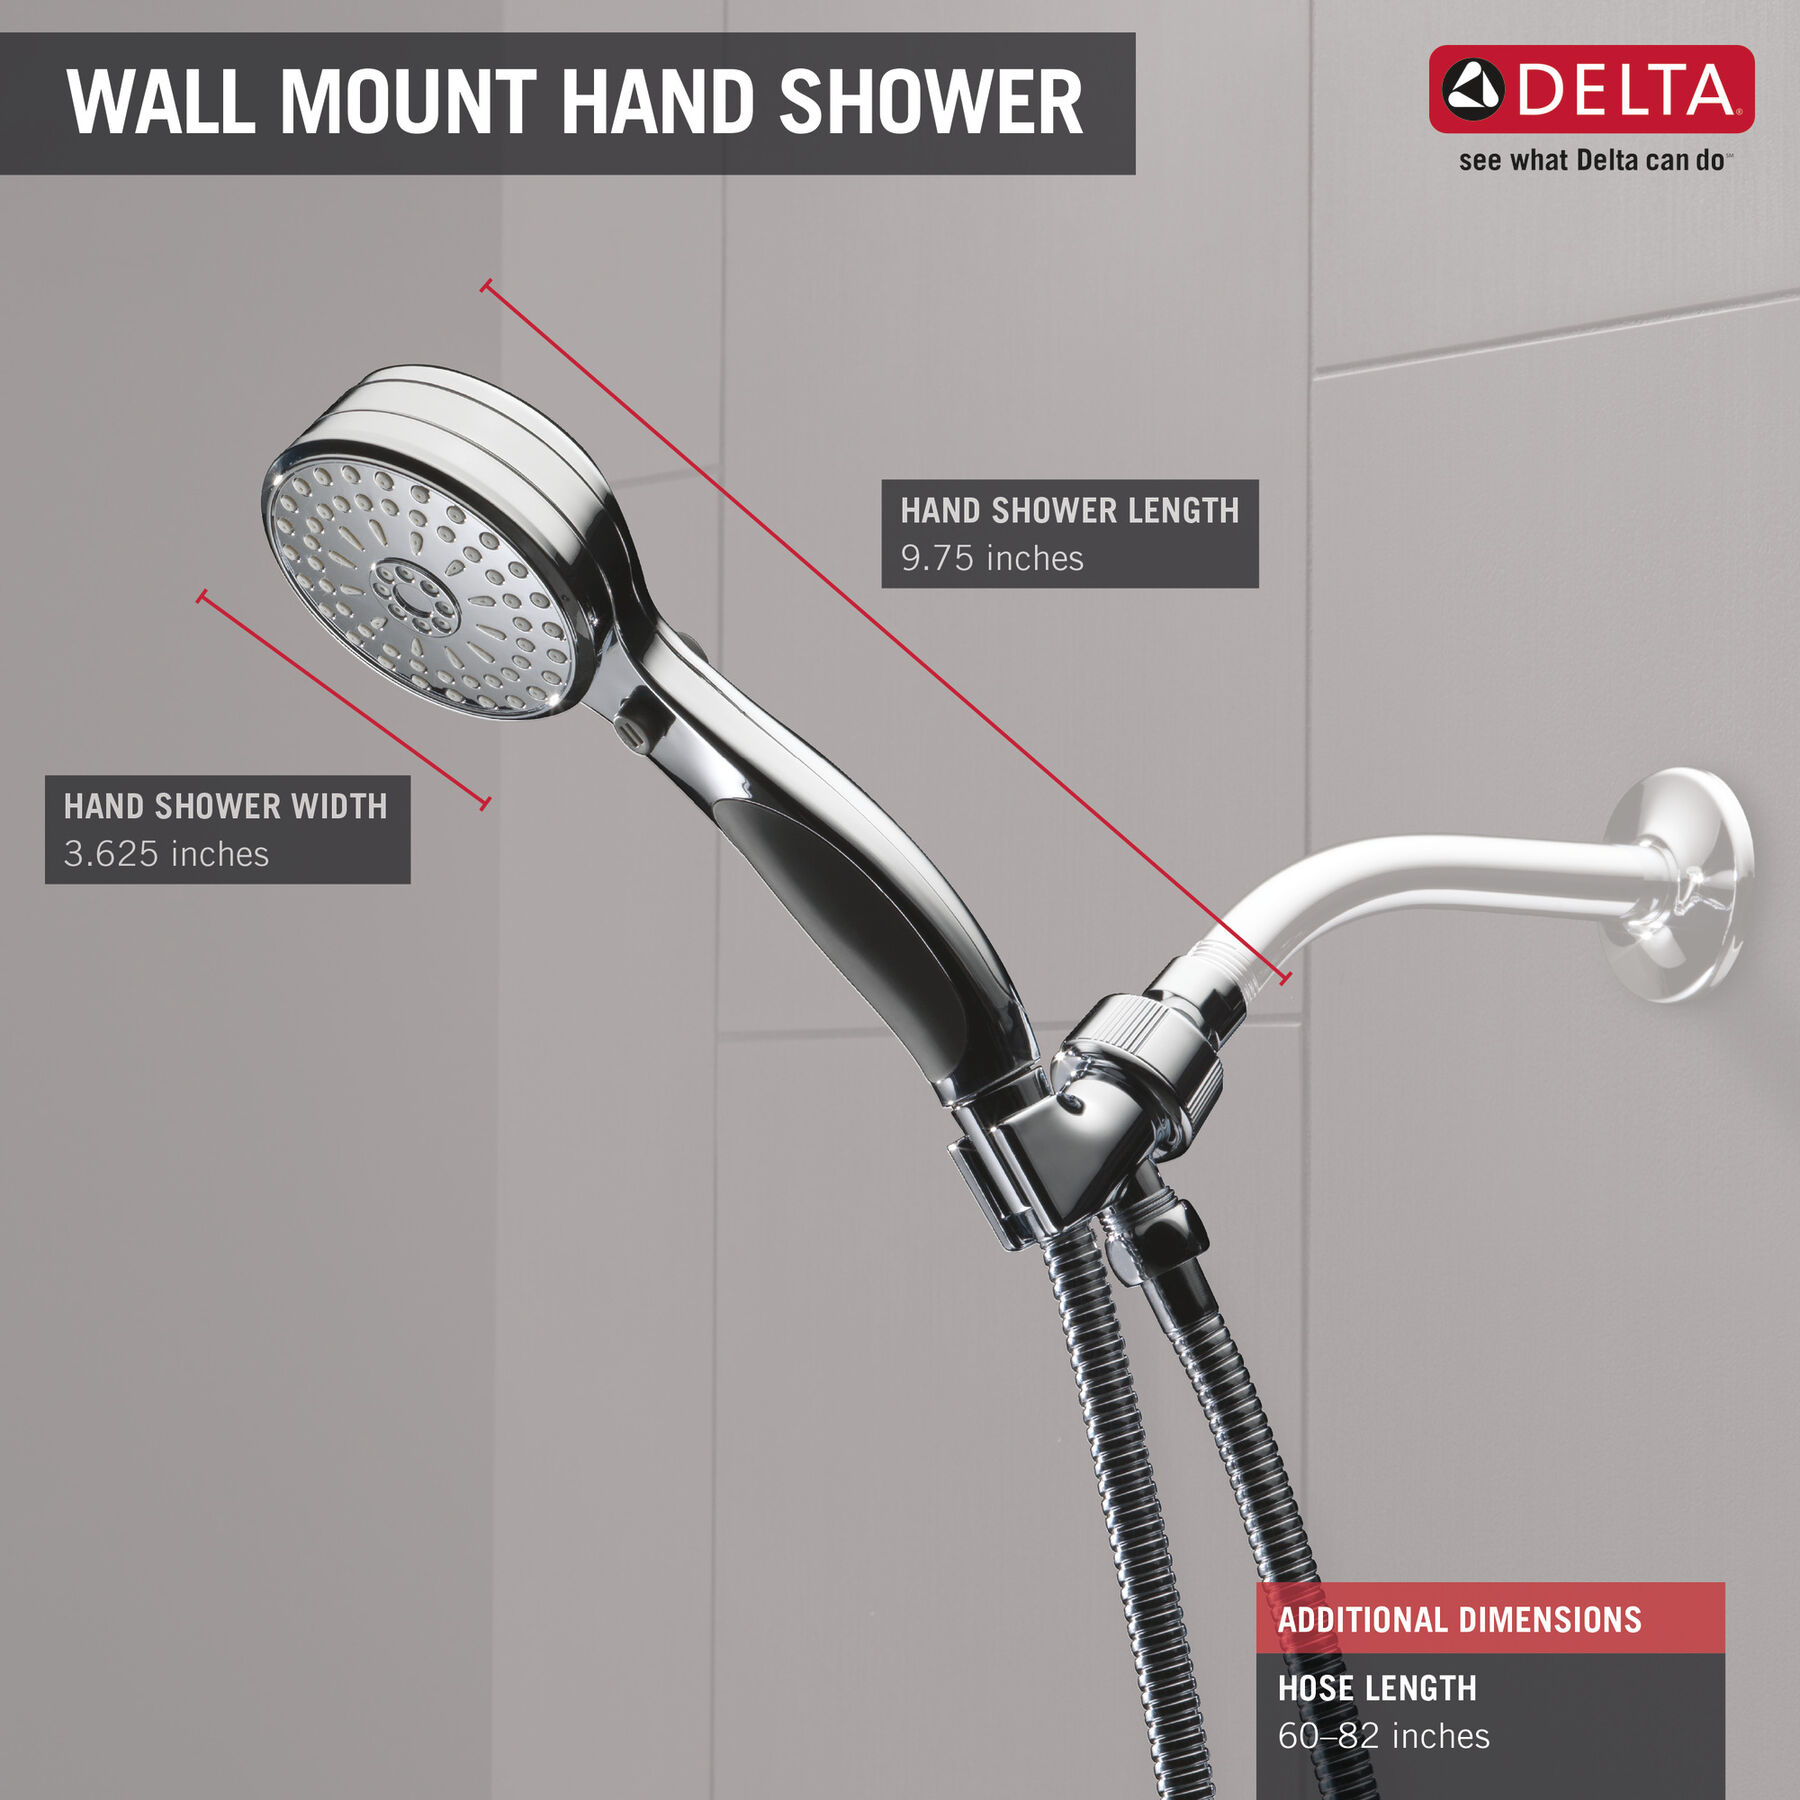 Delta 55424 ActivTouch Adjustable Wall Mount Hand Shower - Chrome